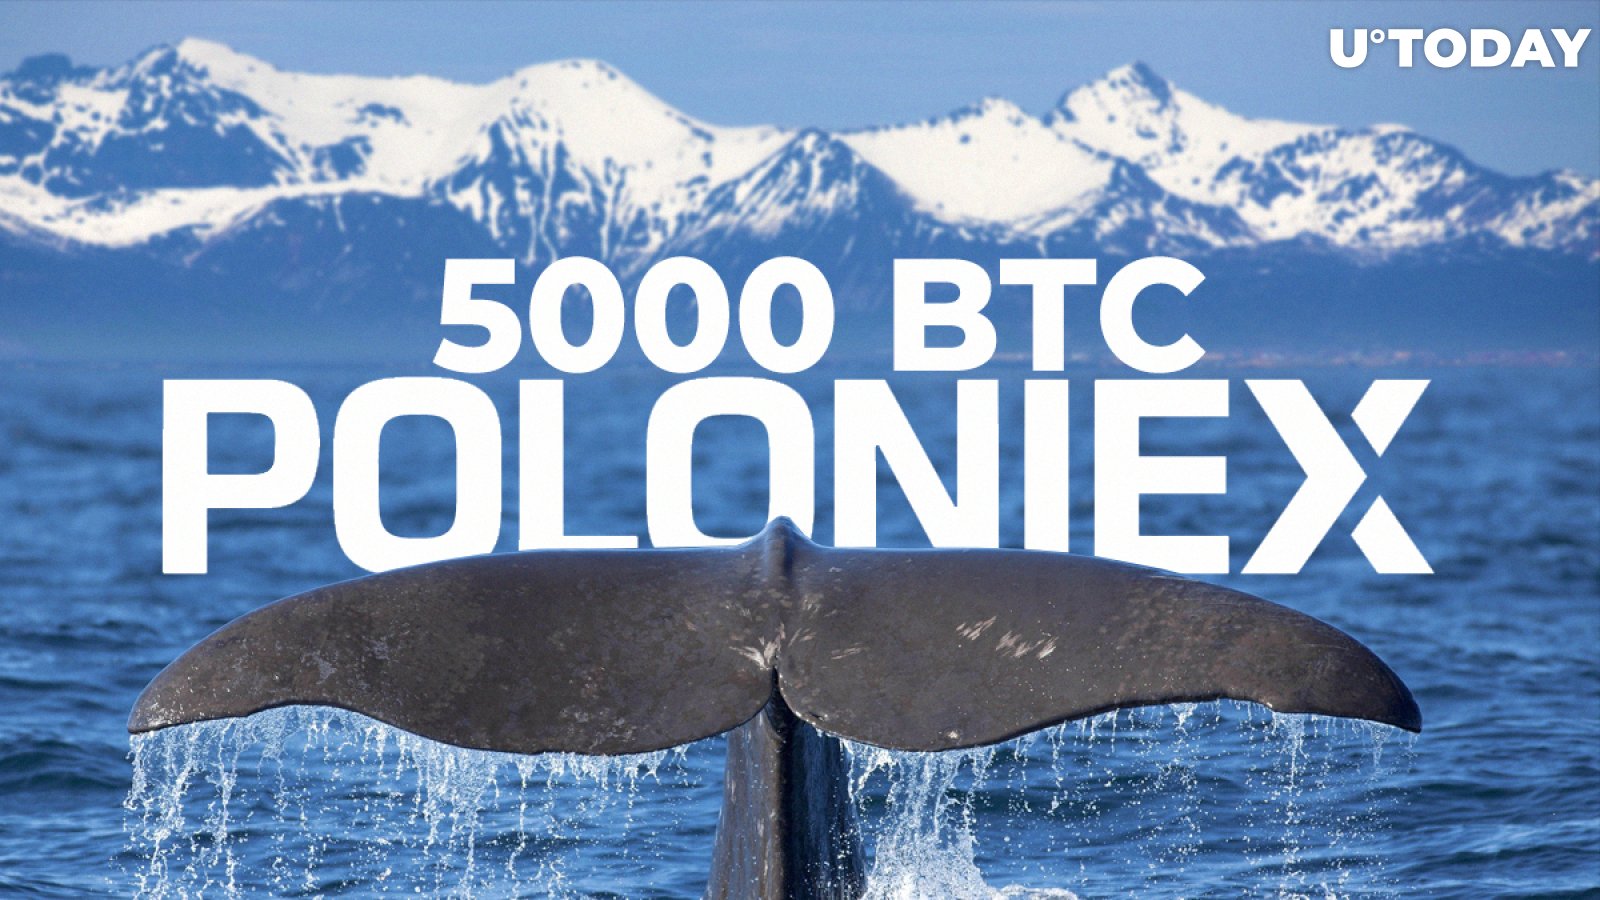 Bitcoin (BTC) Whale Moved 5000 BTC to Poloniex, 'Shuffling Funds' Suspected by Analysts